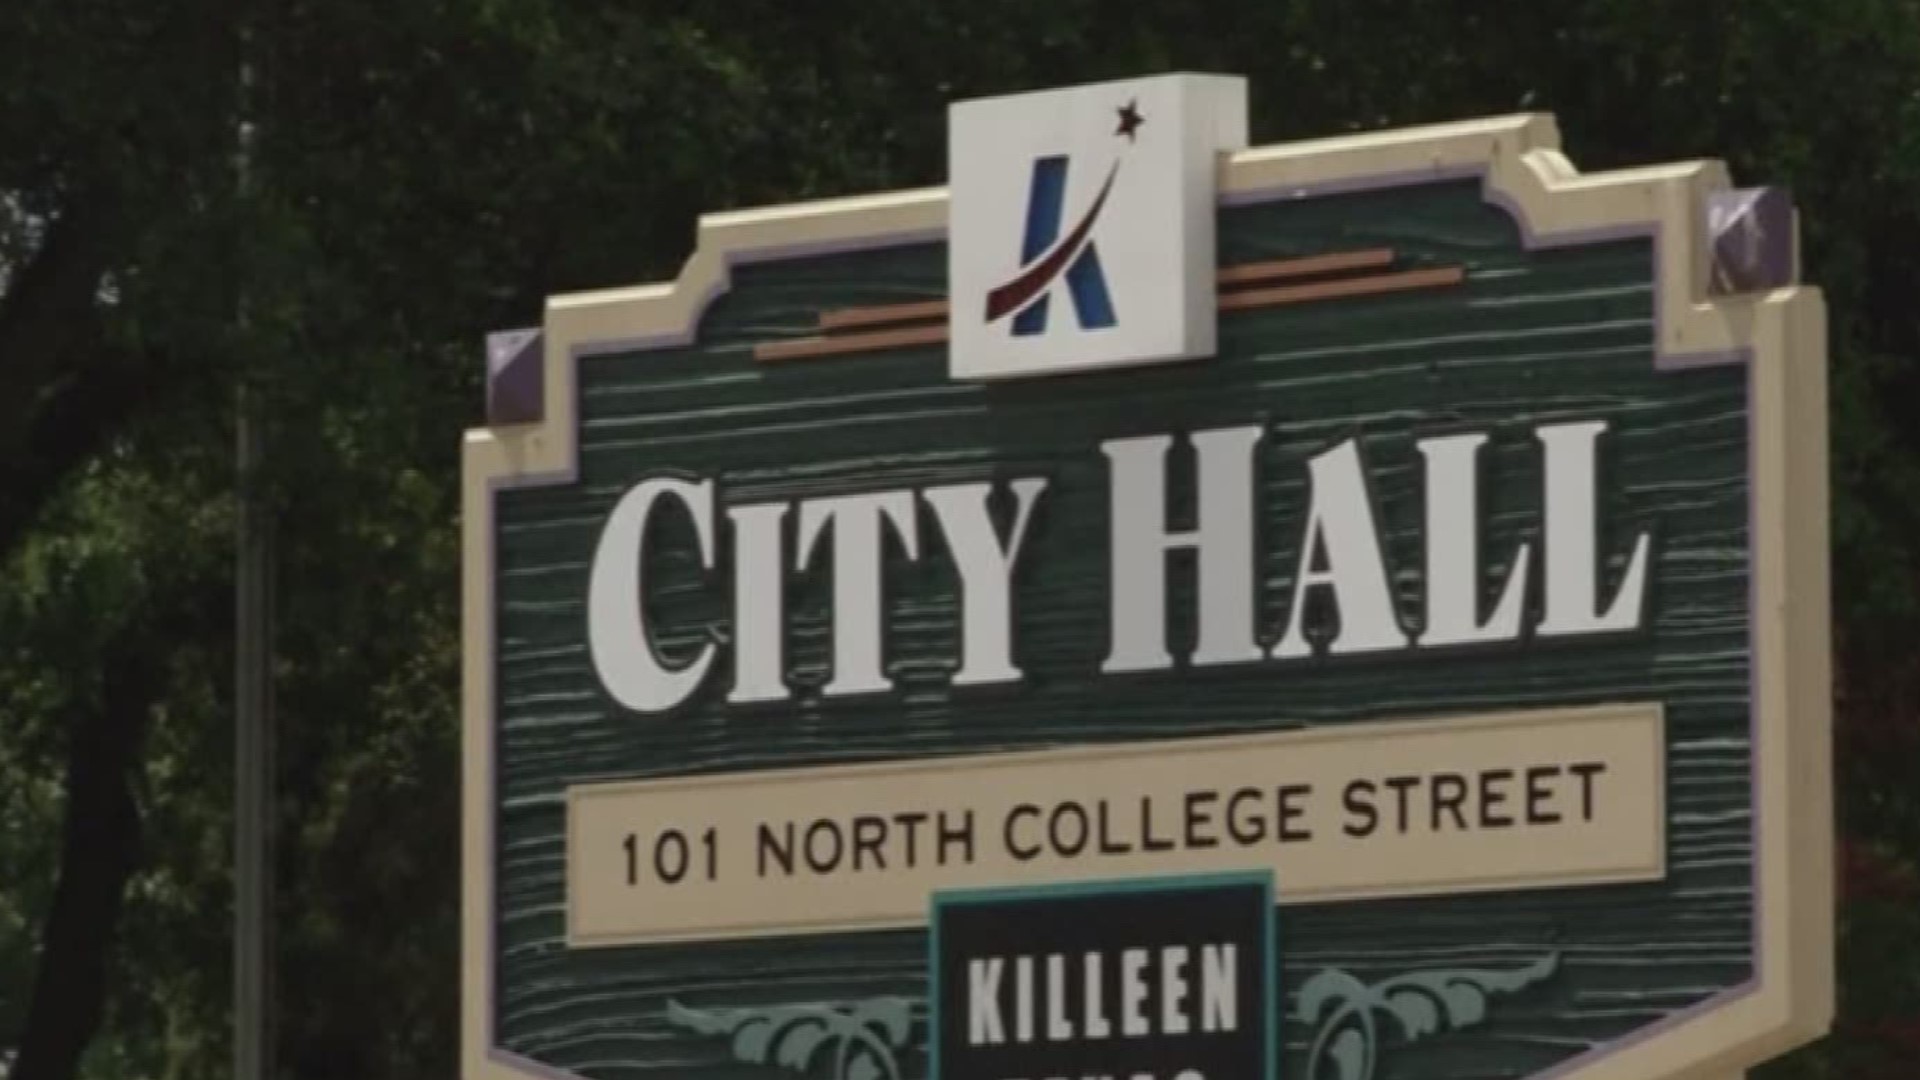 Should builders and developers help pay for needed road and water line improvements in Killeen? The city council voted yes Tuesday night.